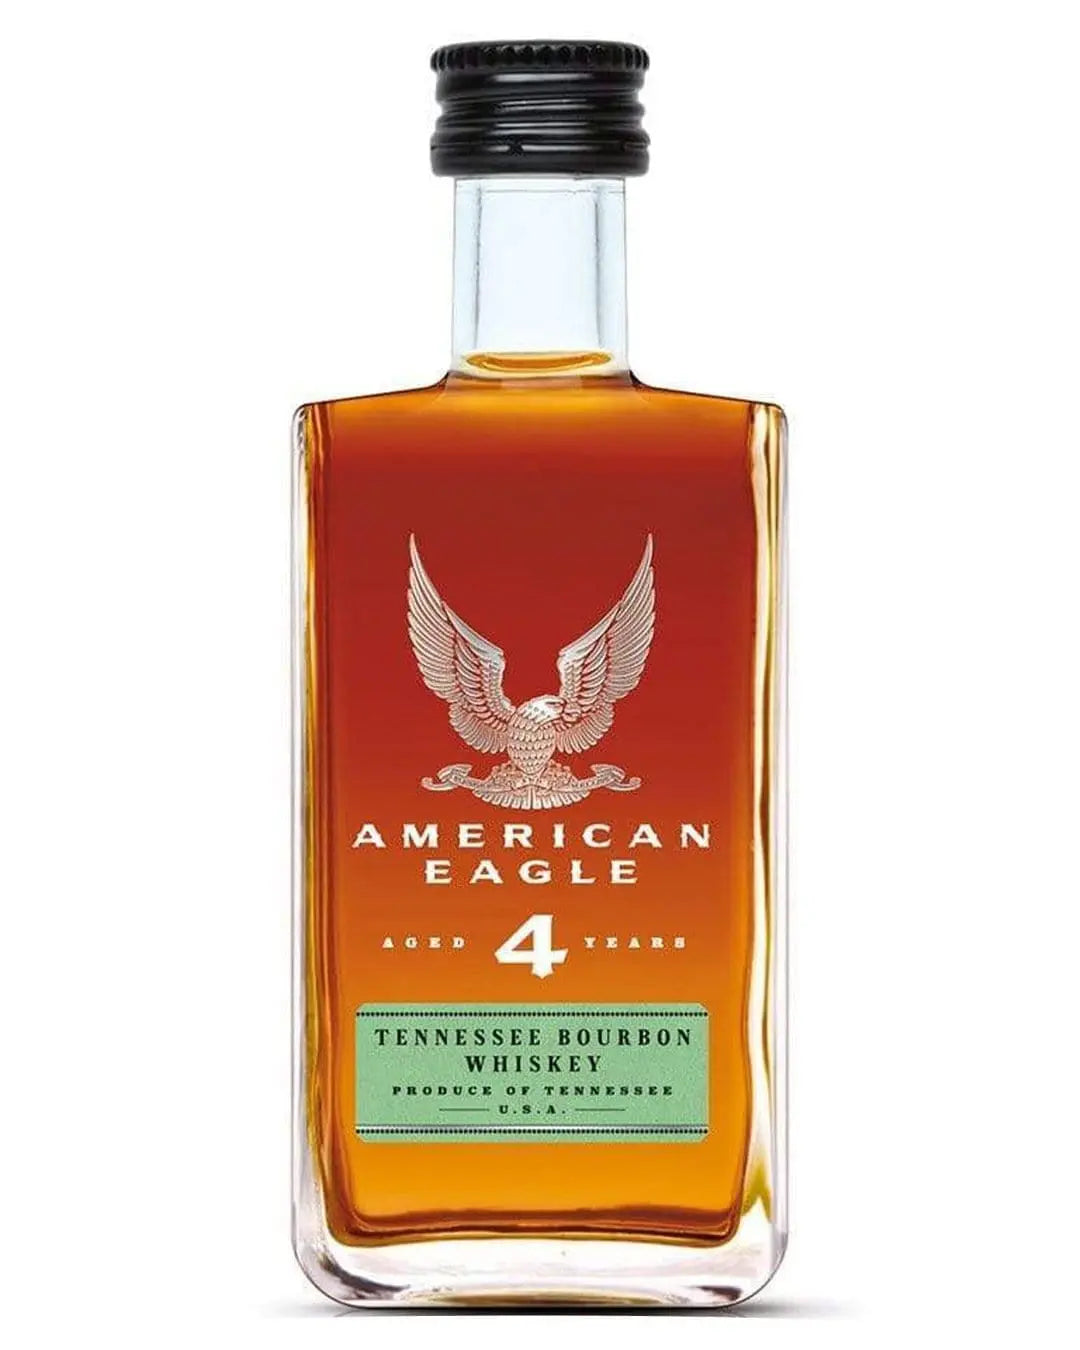 American Eagle 4 Year Old Tennessee Bourbon Whiskey, 5 cl Spirit Miniatures